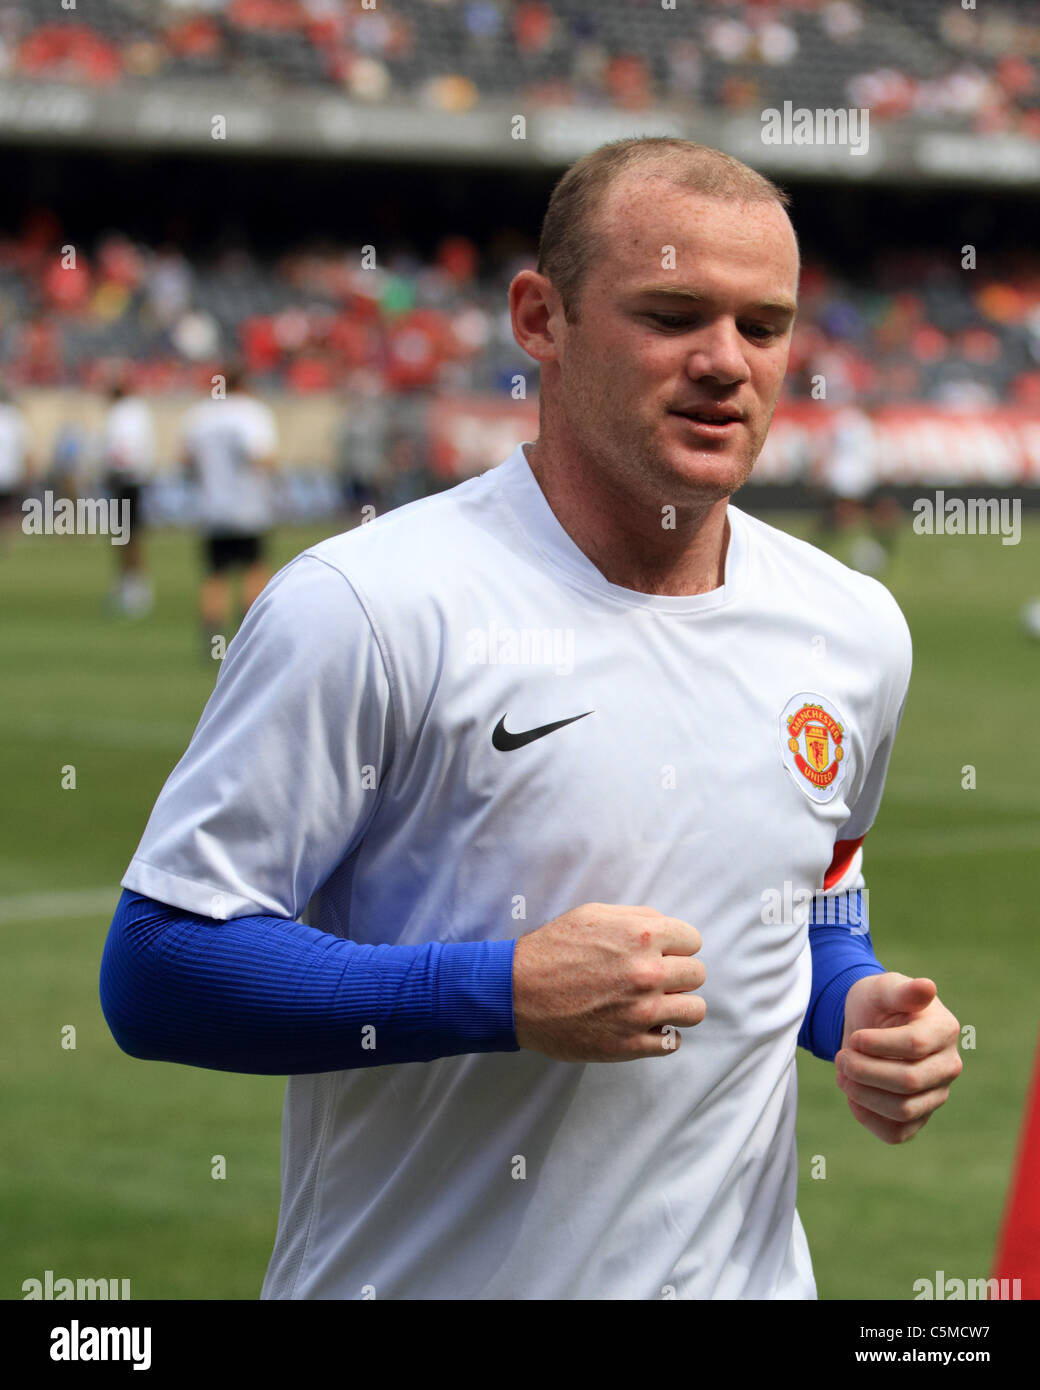 Manchester United striker, Wayne Rooney, works out prior to United's match with the Chicago Fire. July 23, 2011 Stock Photo